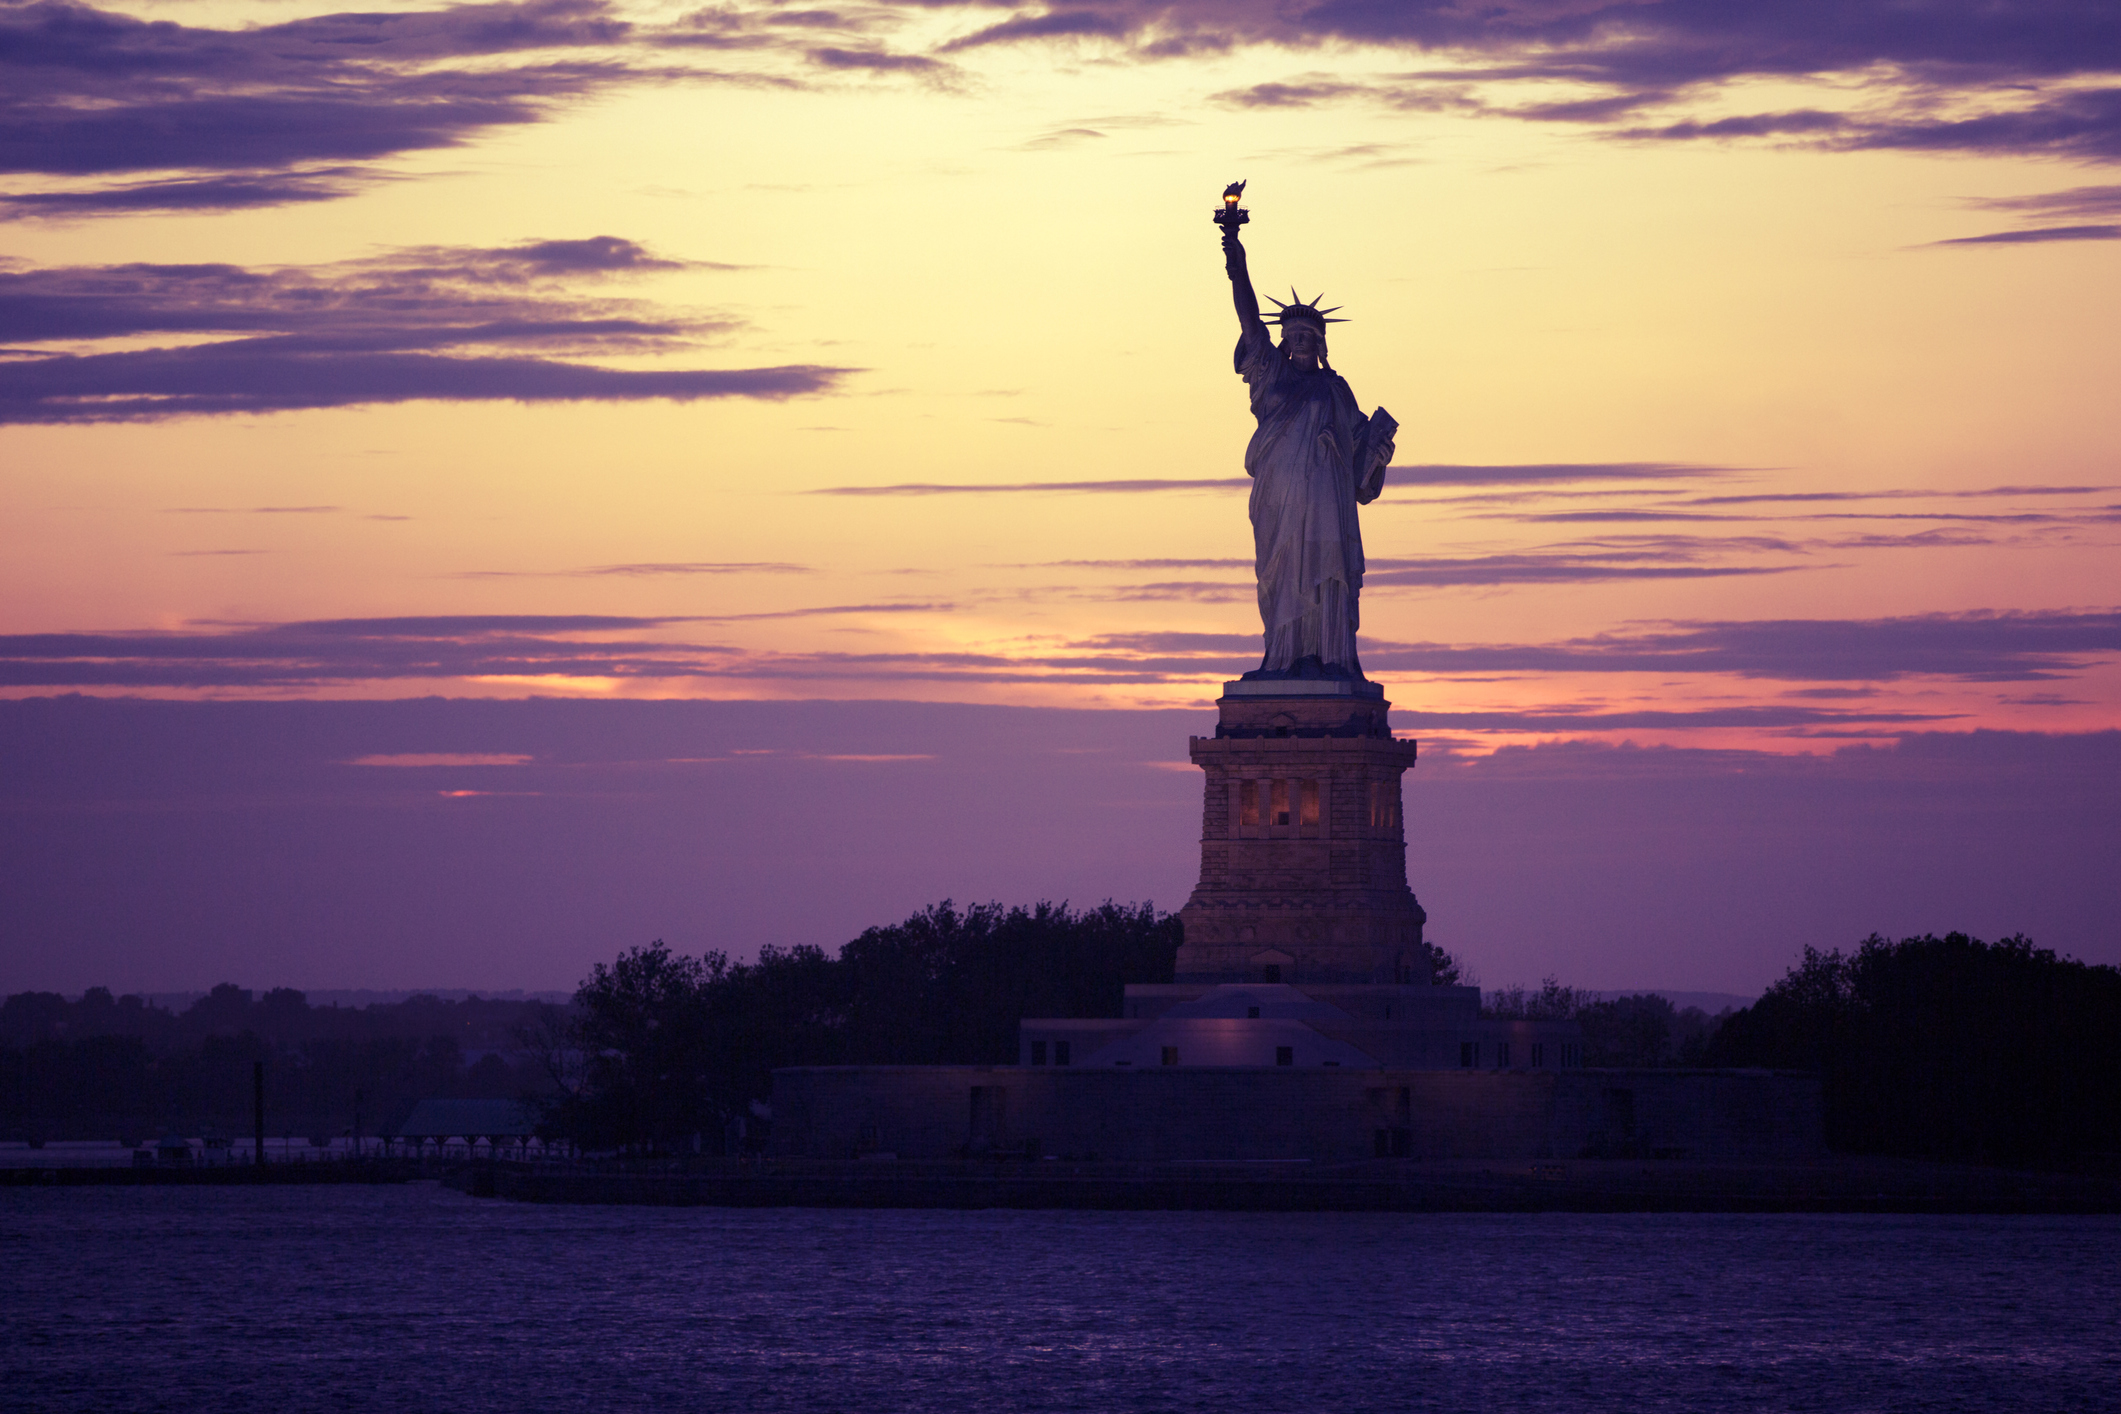 The Statue of Liberty set against a deep purple sunset